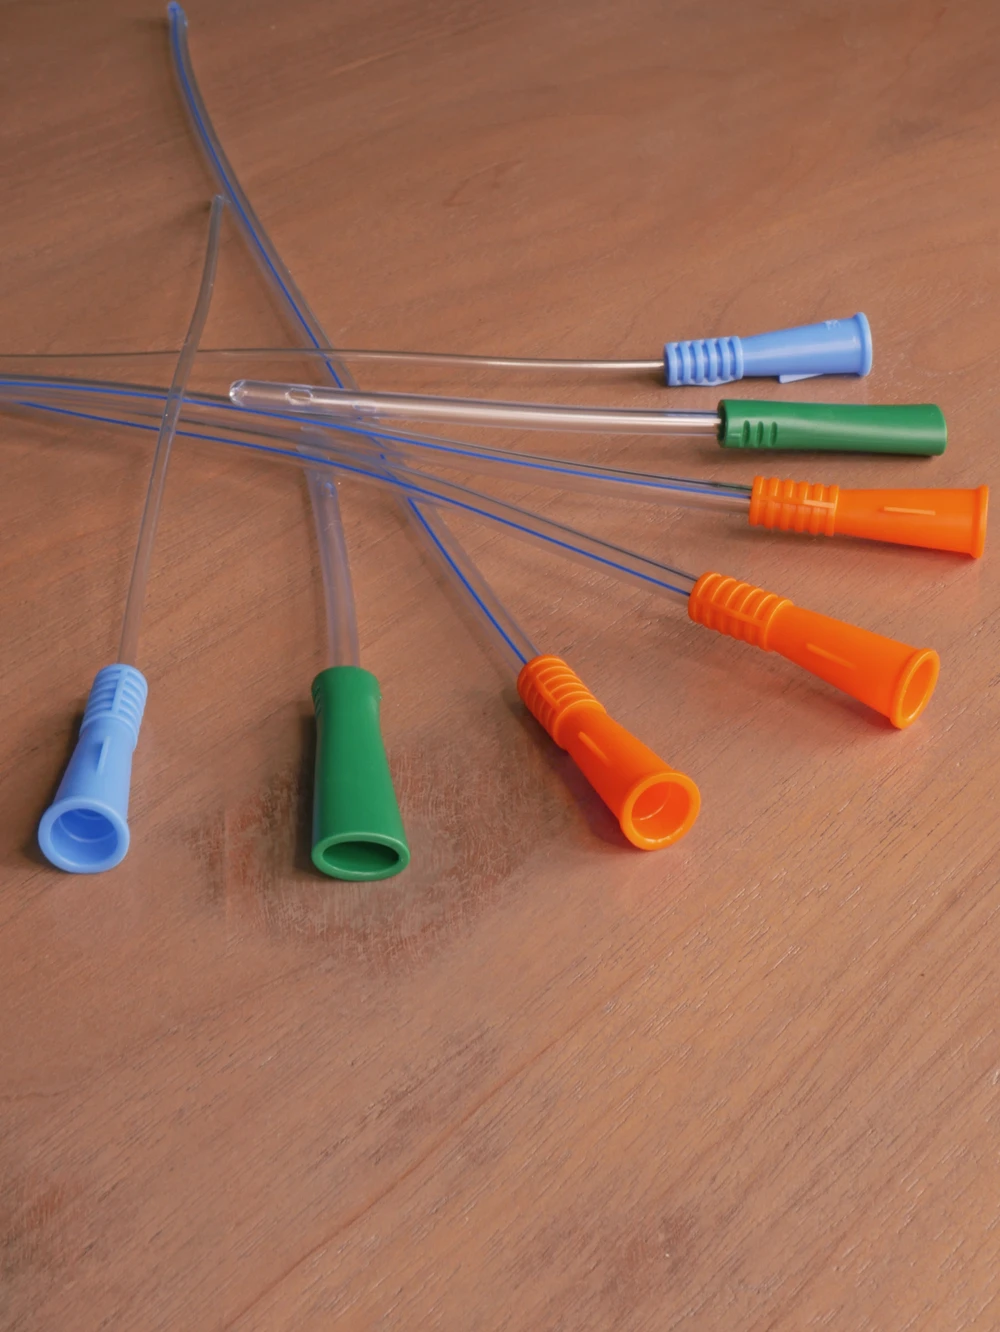 Picture close-up of intermittent catheters from RA Fischer layed out on a table.